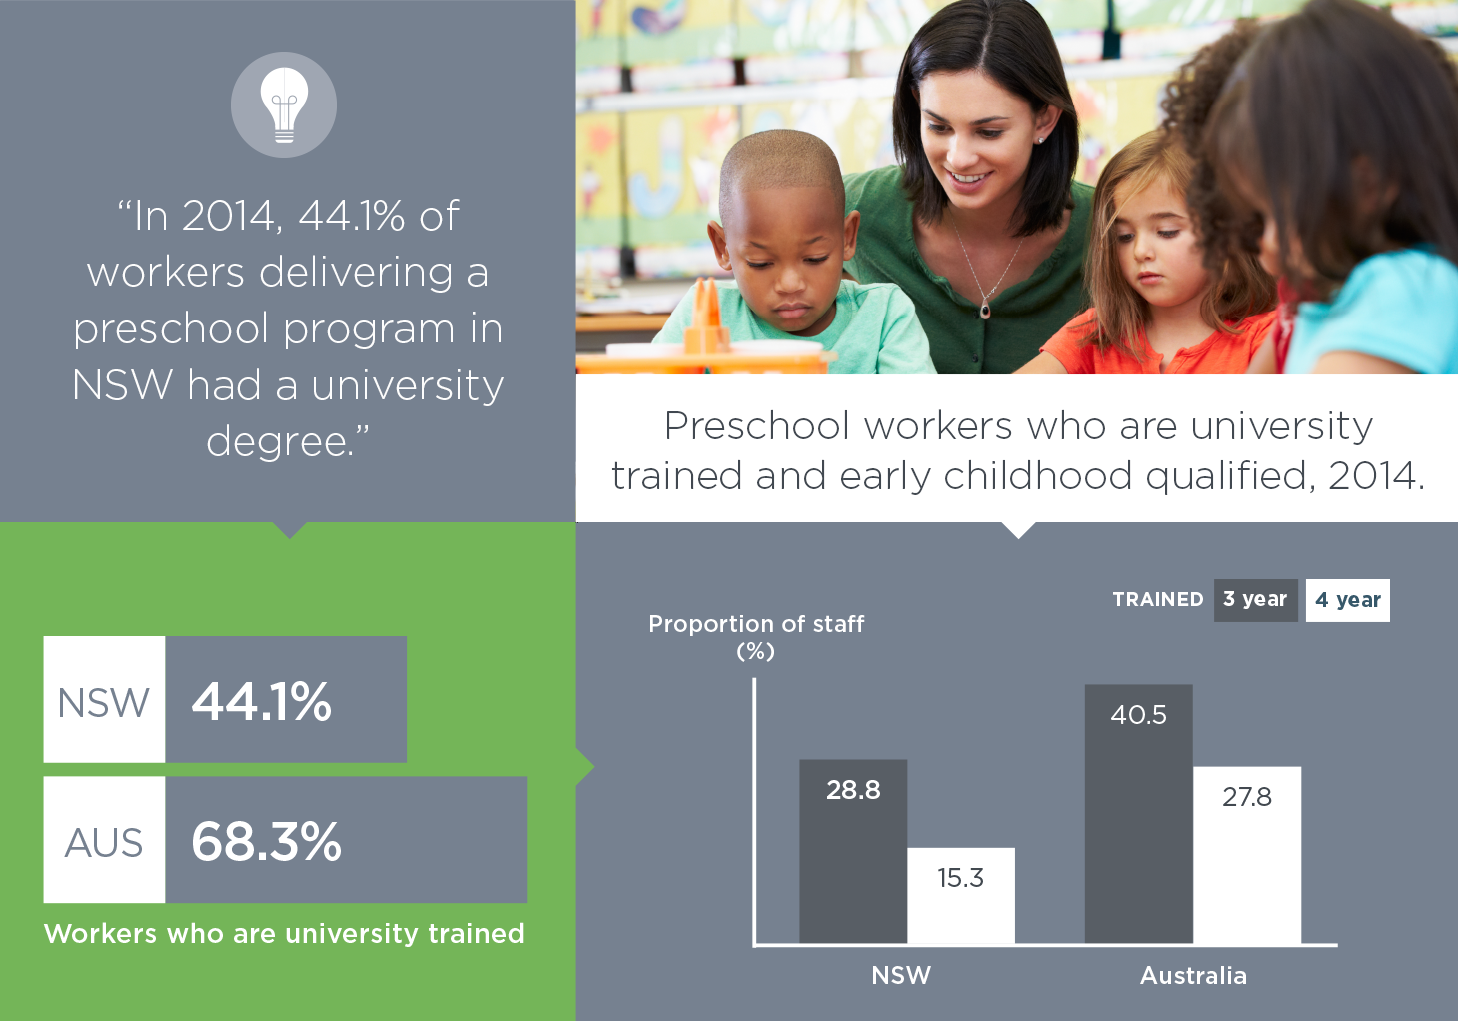 In 2014, 44.1 per cent of NSW workers delivering a preschool program in NSW had a university degree. The national average was 68.3 per cent in 2014.